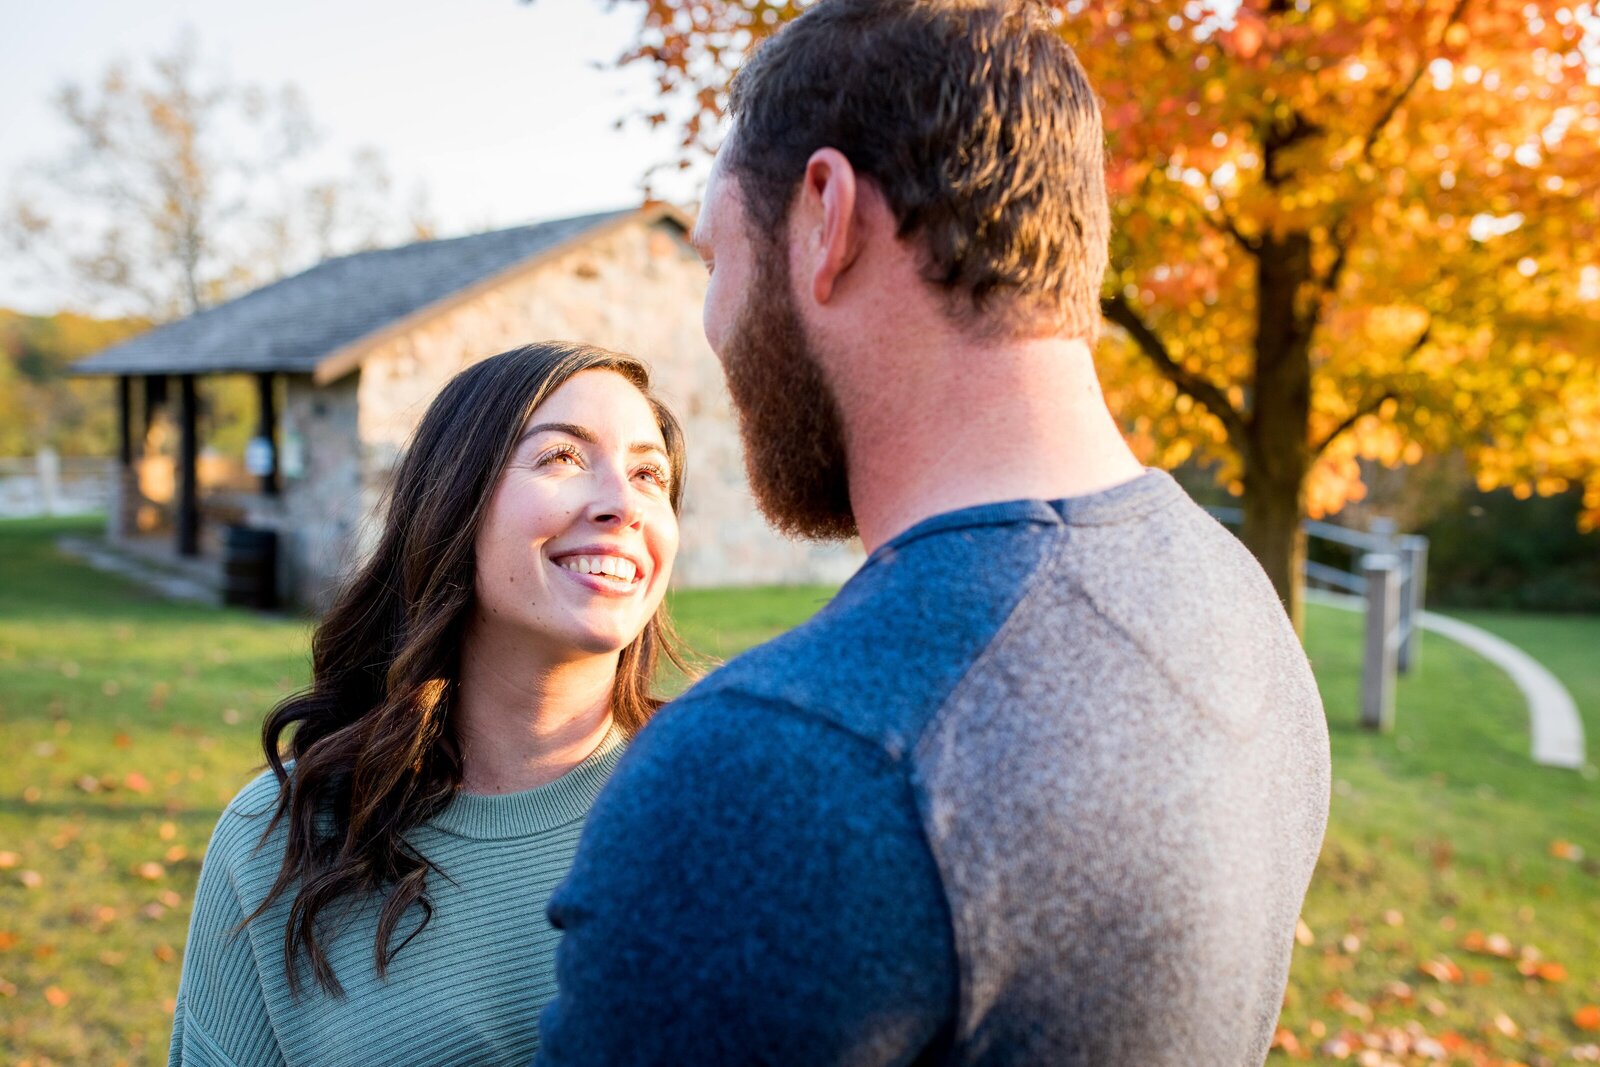 Woman looks at fiance during engagement session with fall trees in background.